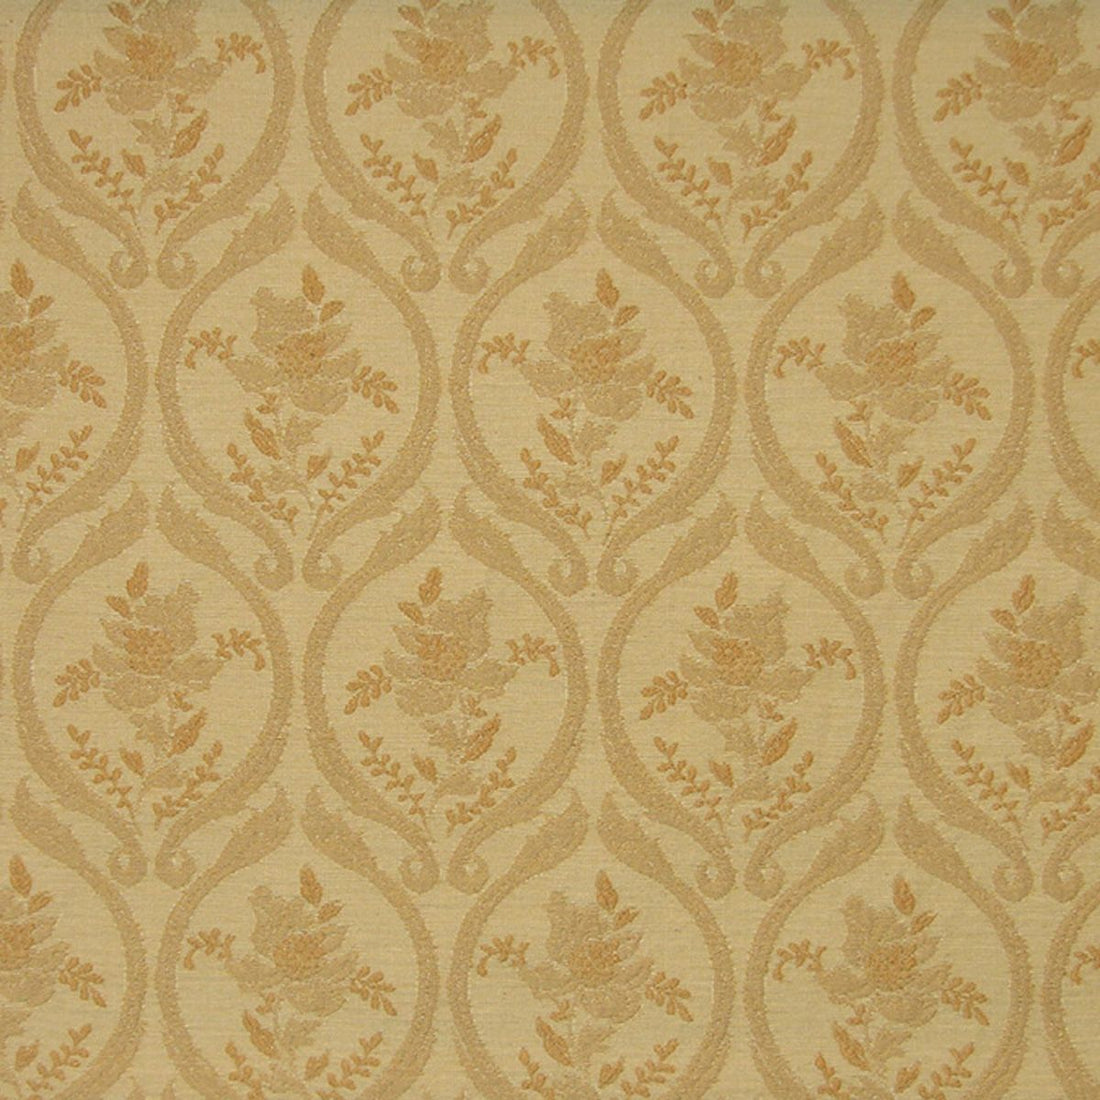 Fairholme fabric in brown color - pattern number PQ 00031530 - by Scalamandre in the Old World Weavers collection